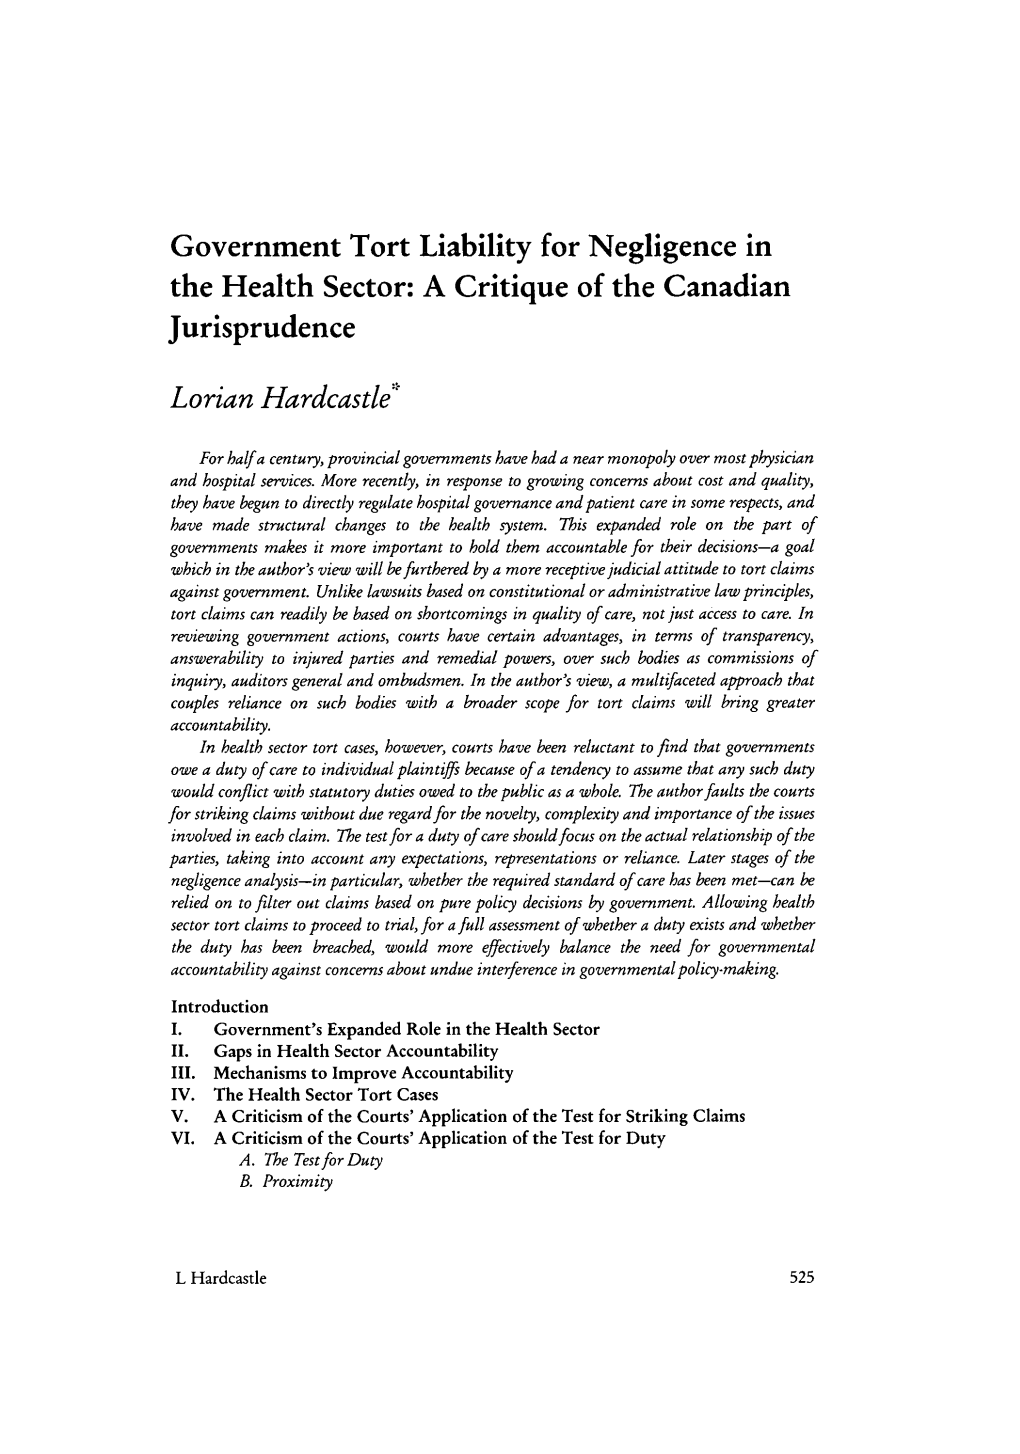 Government Tort Liability for Negligence in the Health Sector: a Critique of the Canadian Jurisprudence